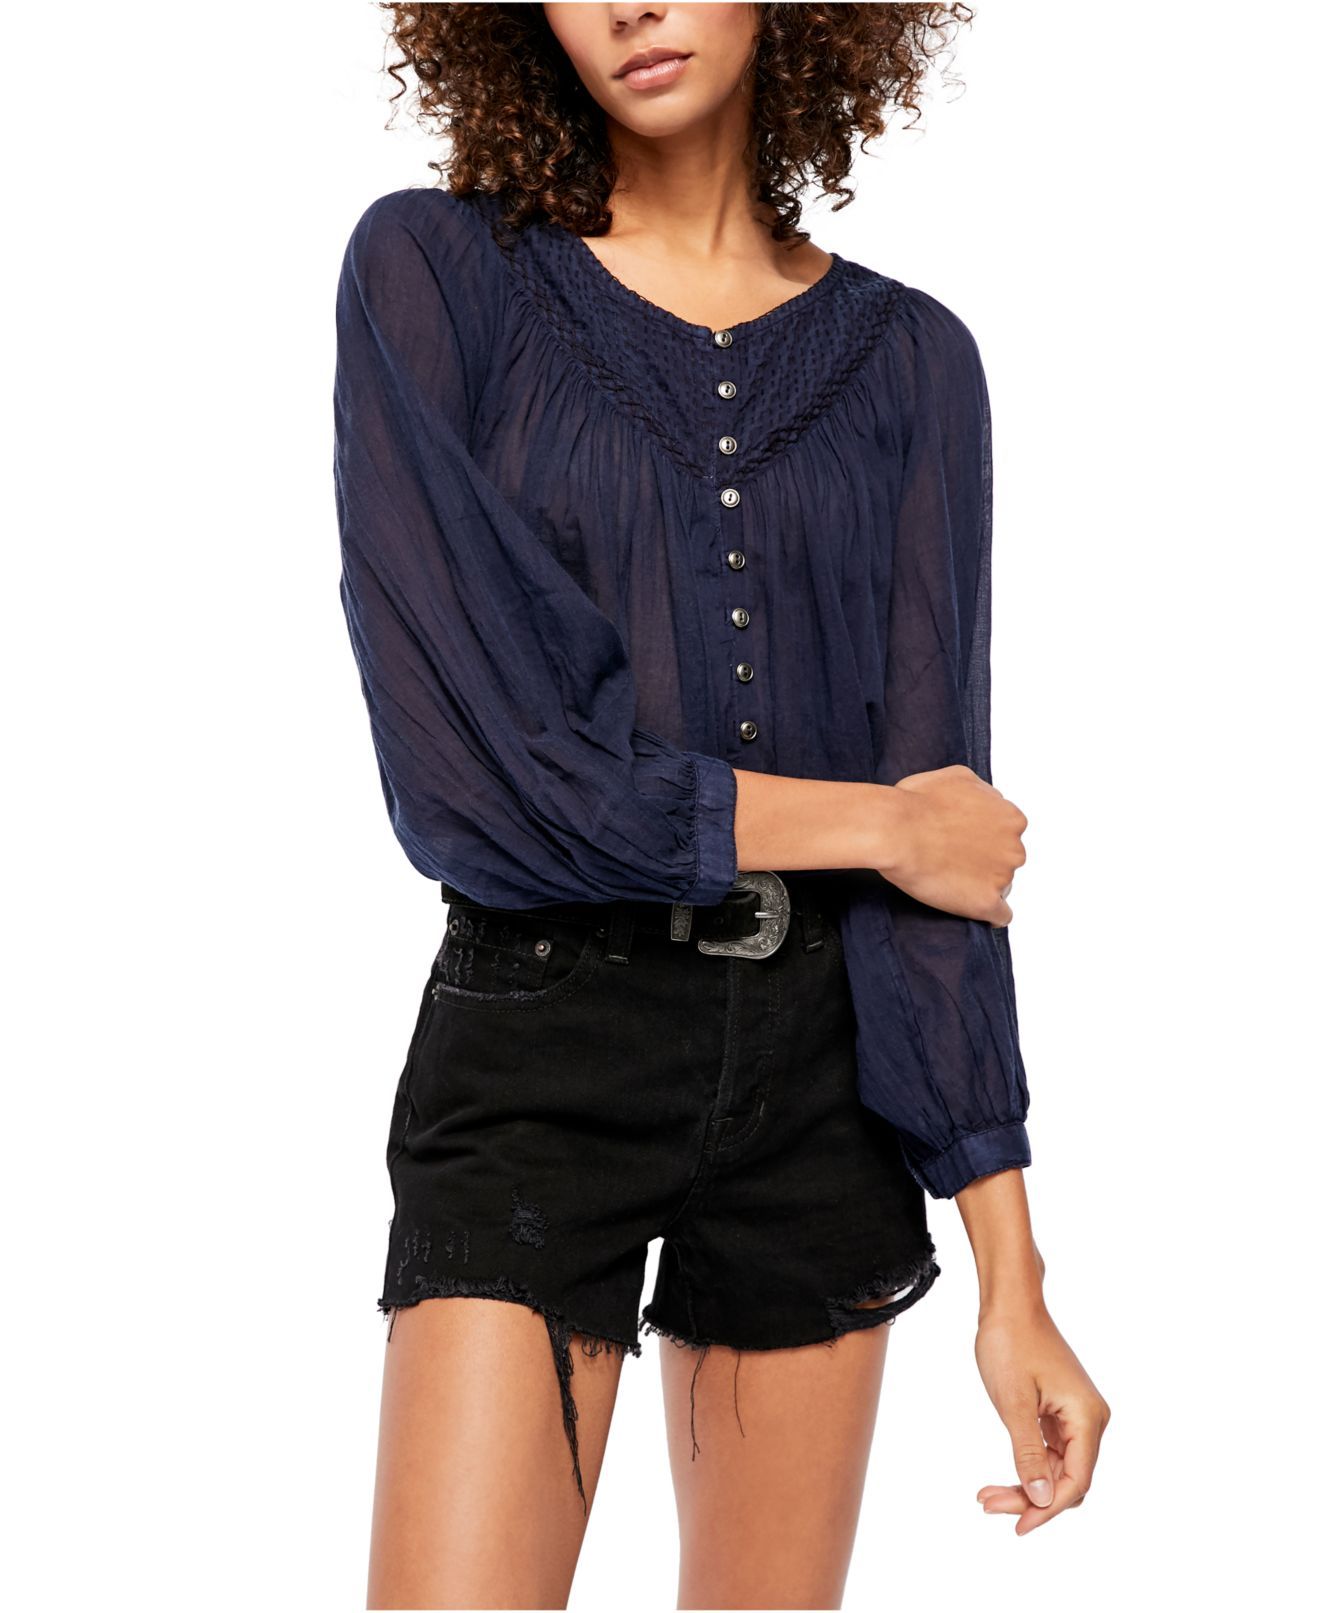 Color: Blues Size Type: Regular Size (Women's): XS Sleeve Length: 3/4 Sleeve Type: Button-Up Style: Knit Top Neckline: Round Neck Pattern: Solid Theme: Classic Material: 100% Cotton